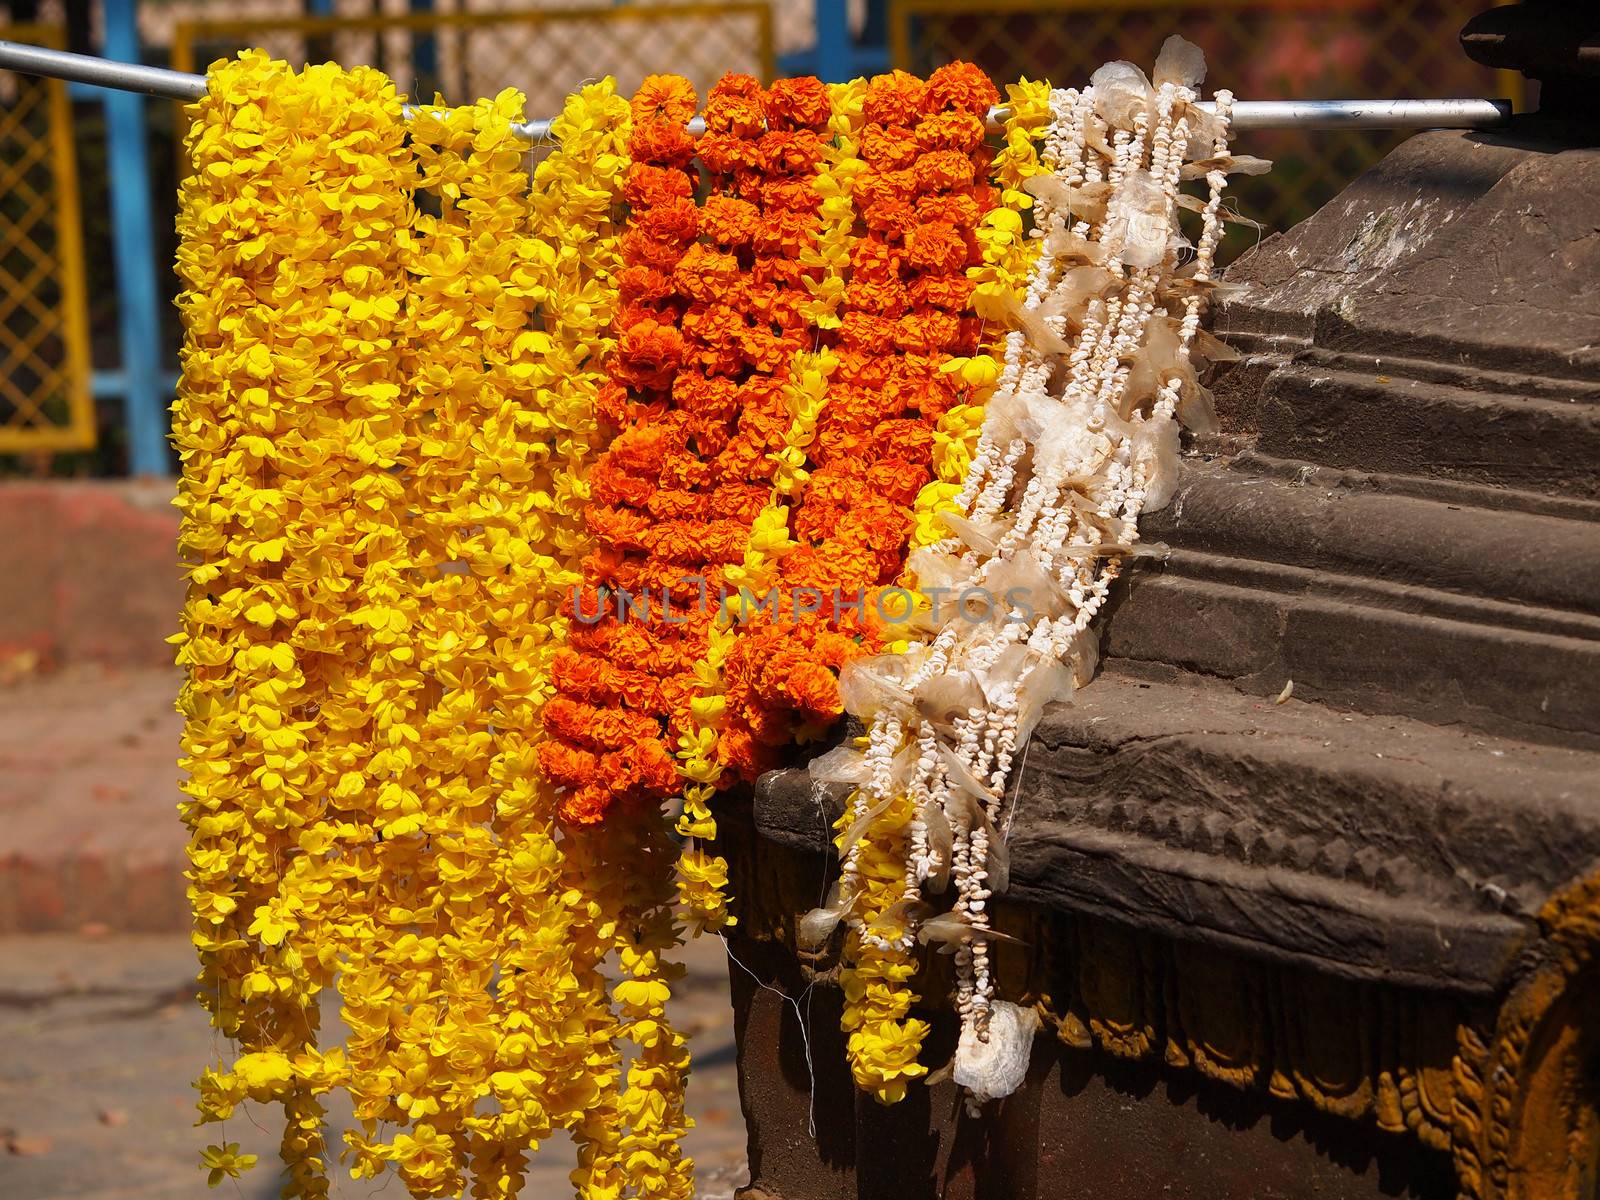 orange and yellow floral arrangement for holi festival and religious offerings in india.       